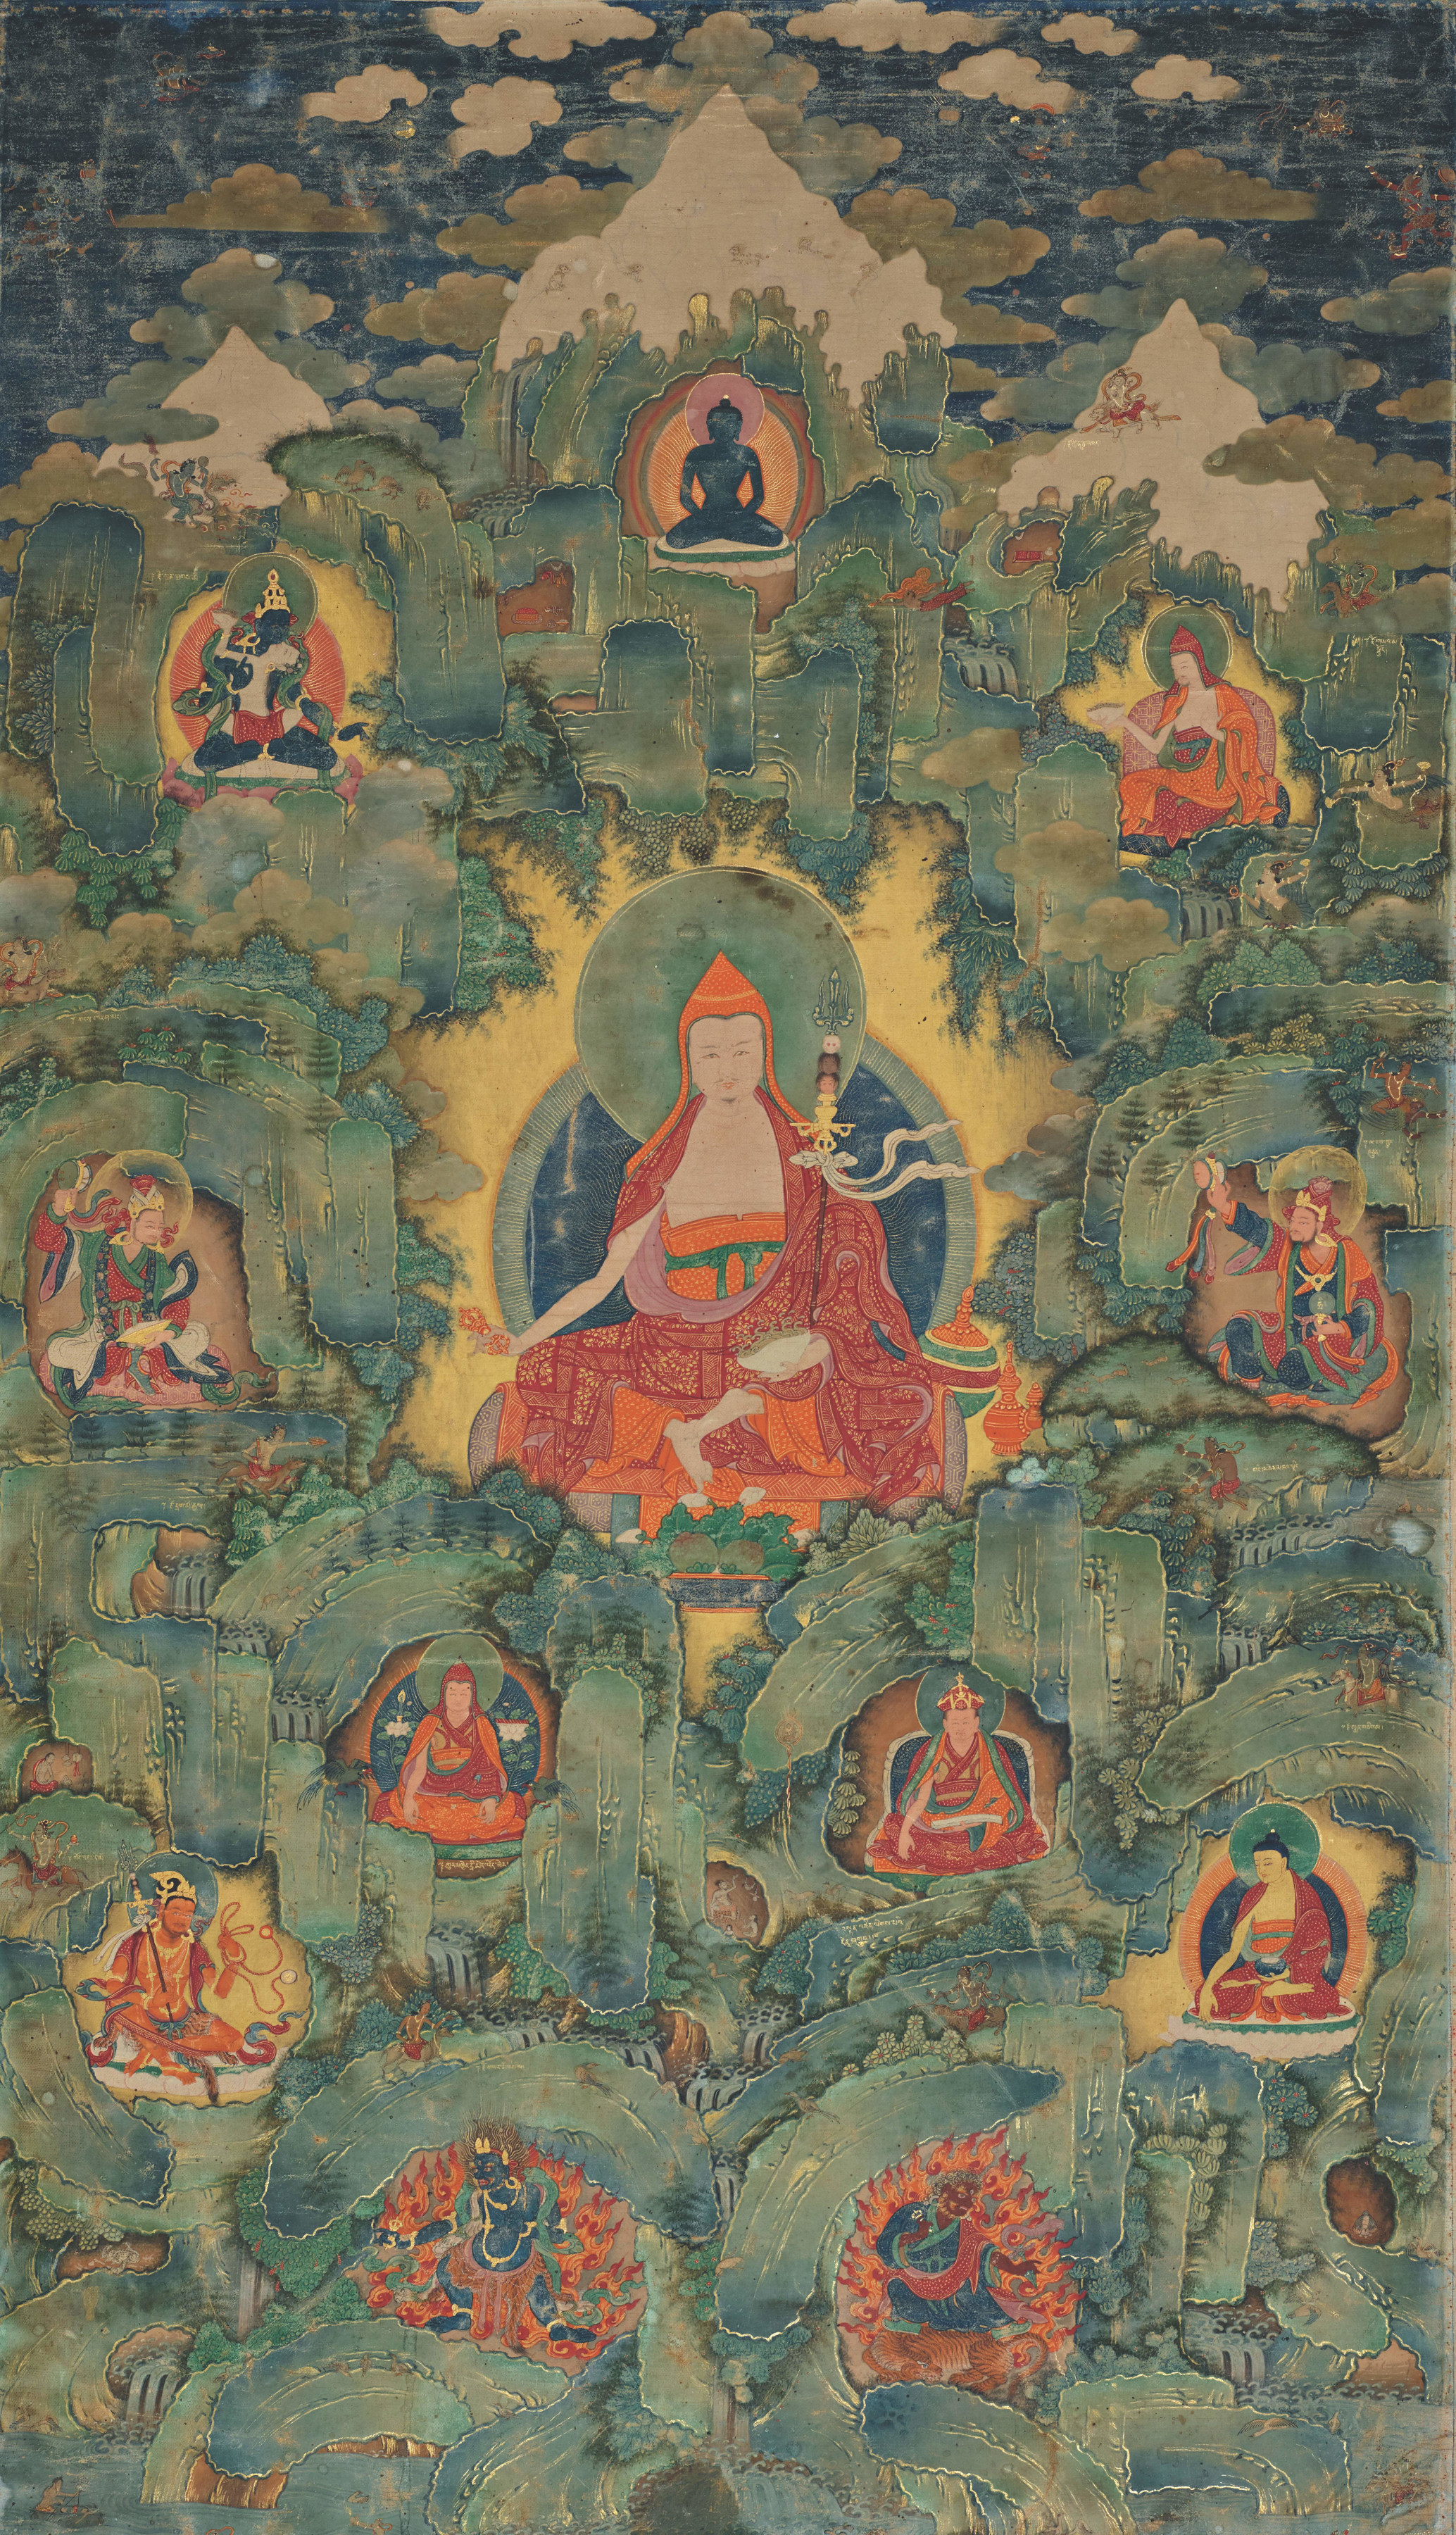 The revered Indian tantric master Padmasambhava appears at the center of the painting seated in a golden grotto 